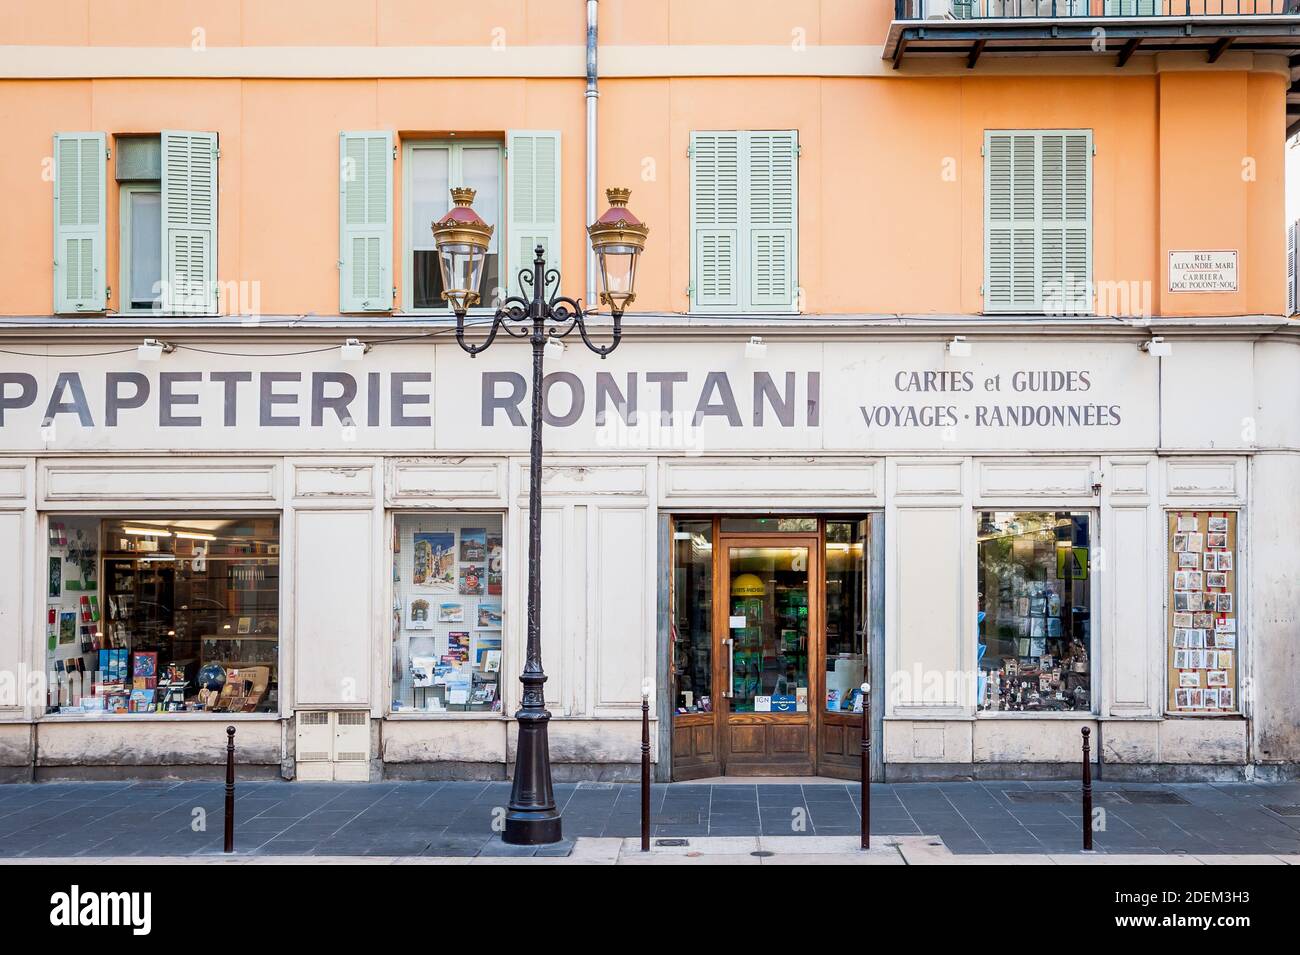 The famous Papeterie Rontani bookshop in the city of Nice, South of France. Stock Photo